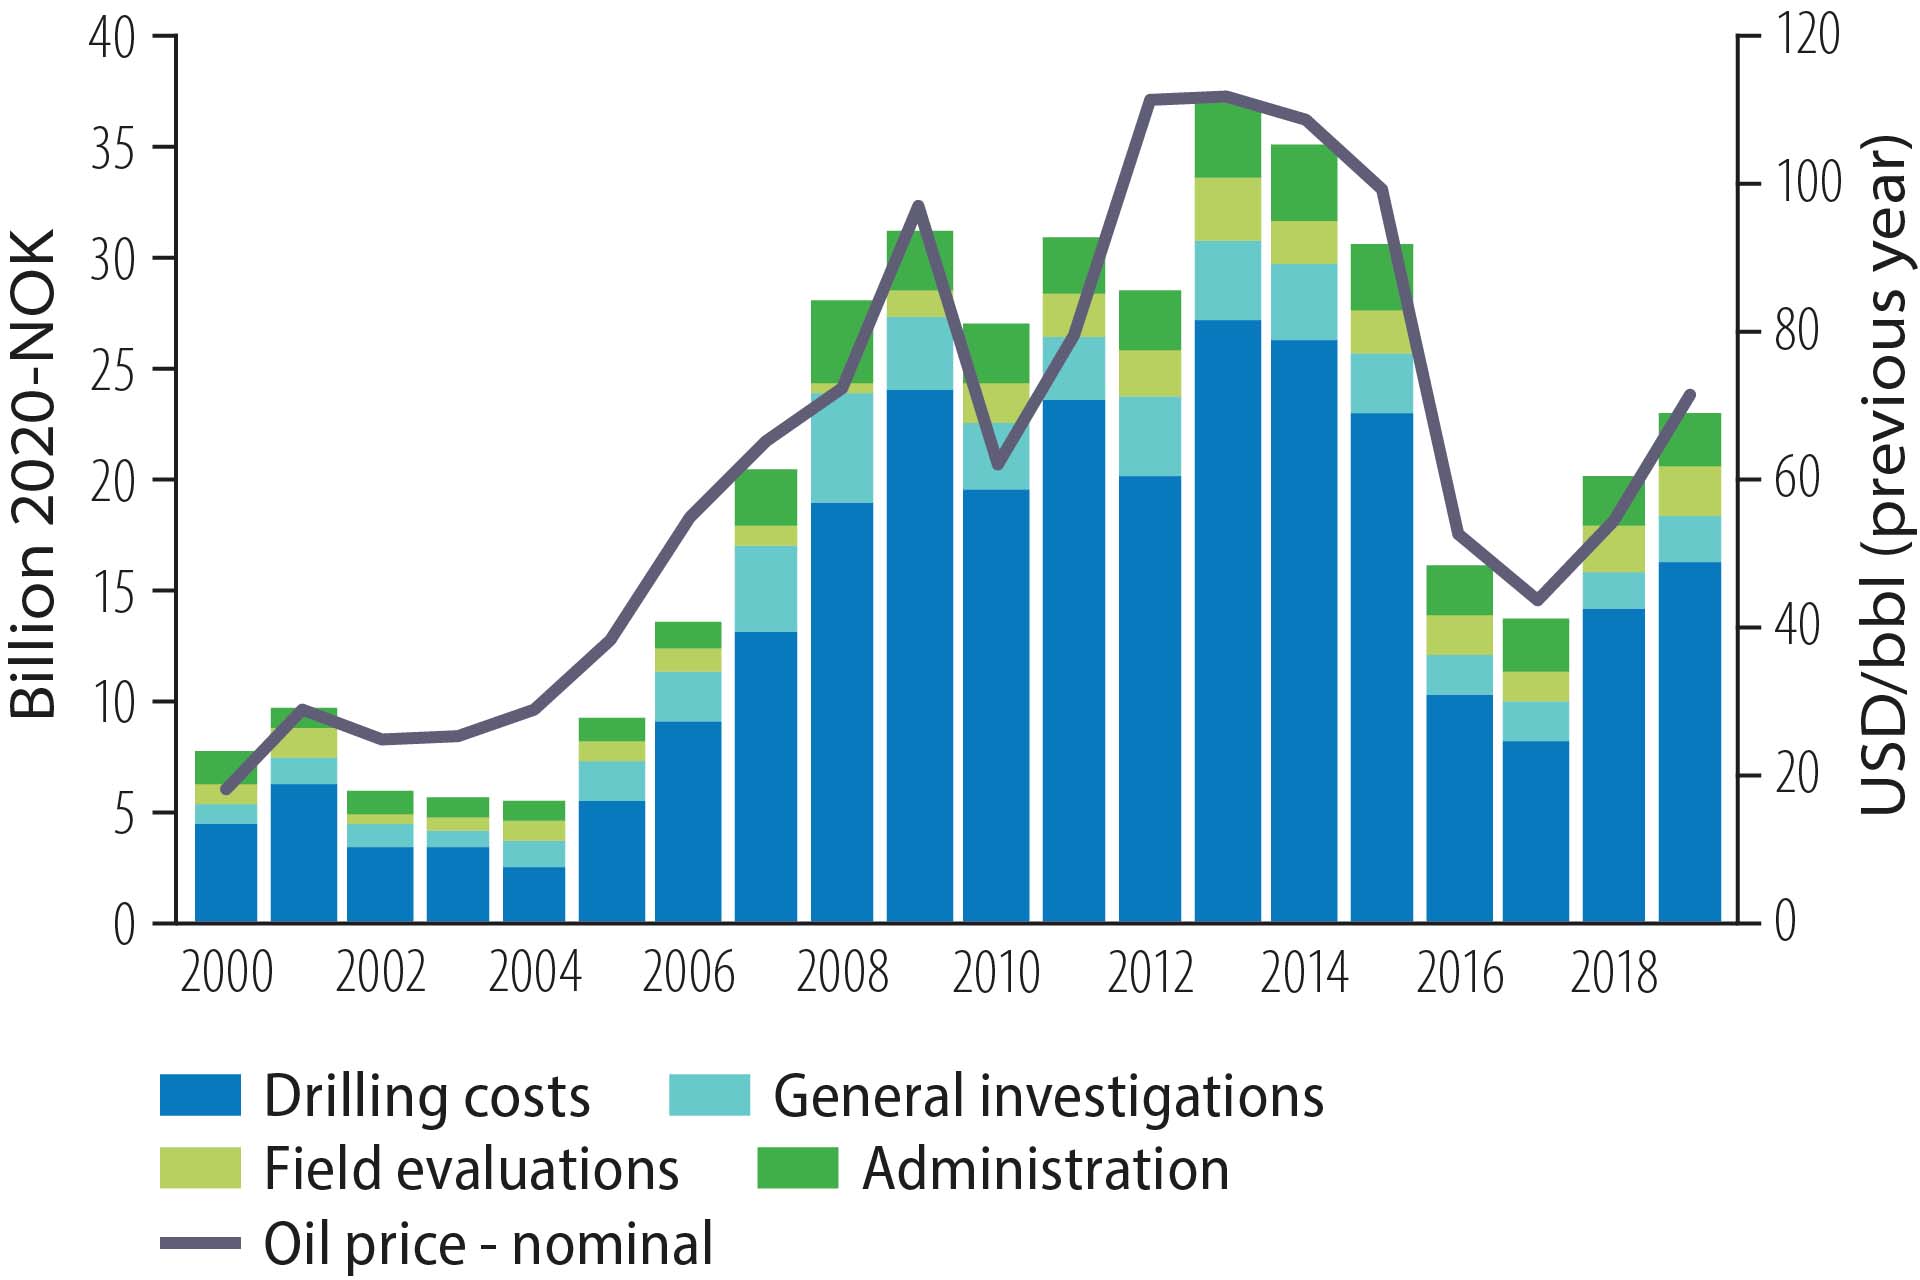 Figure 4.2 Exploration costs and oil price developments, 2000-19